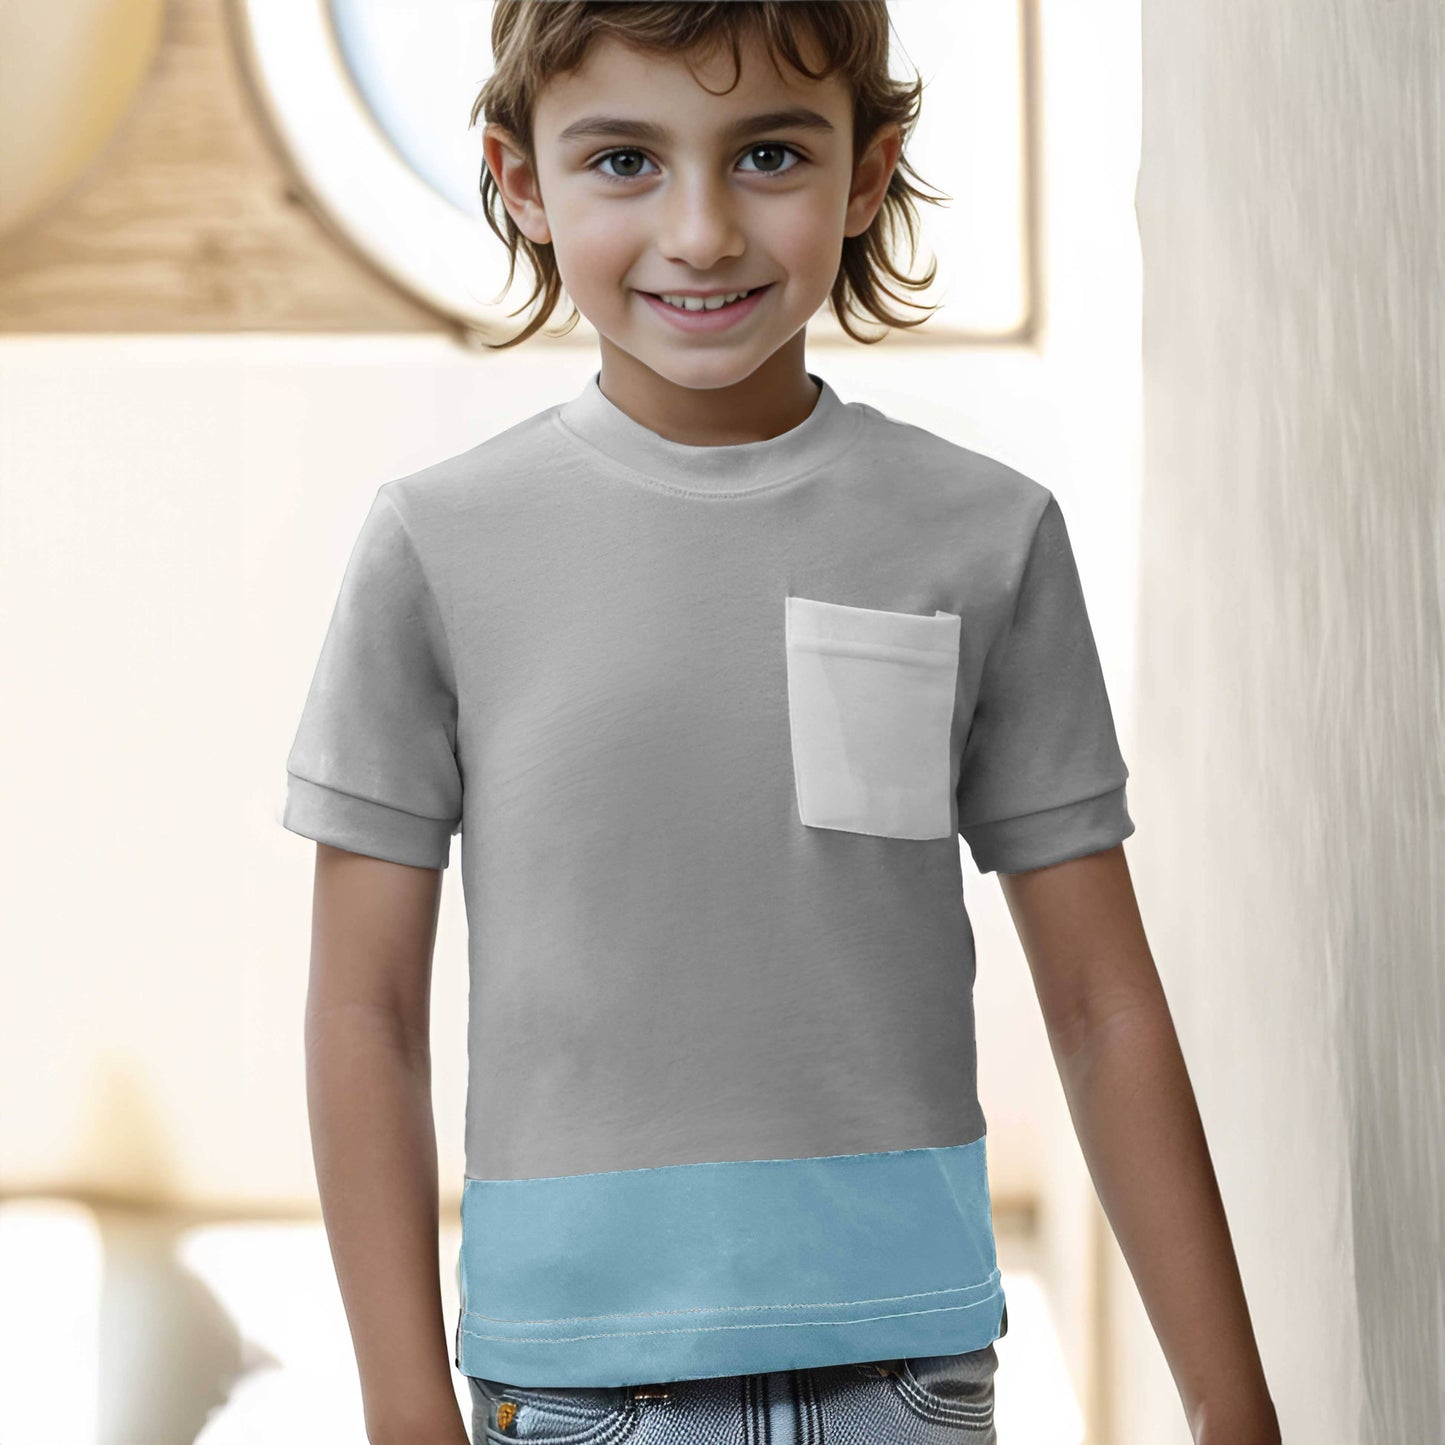 Polo Republica Kid's Contrast Pocket Panel Minor Fault Tee Shirt Kid's Tee Shirt Polo Republica Stealth Grey 2-3 Years 